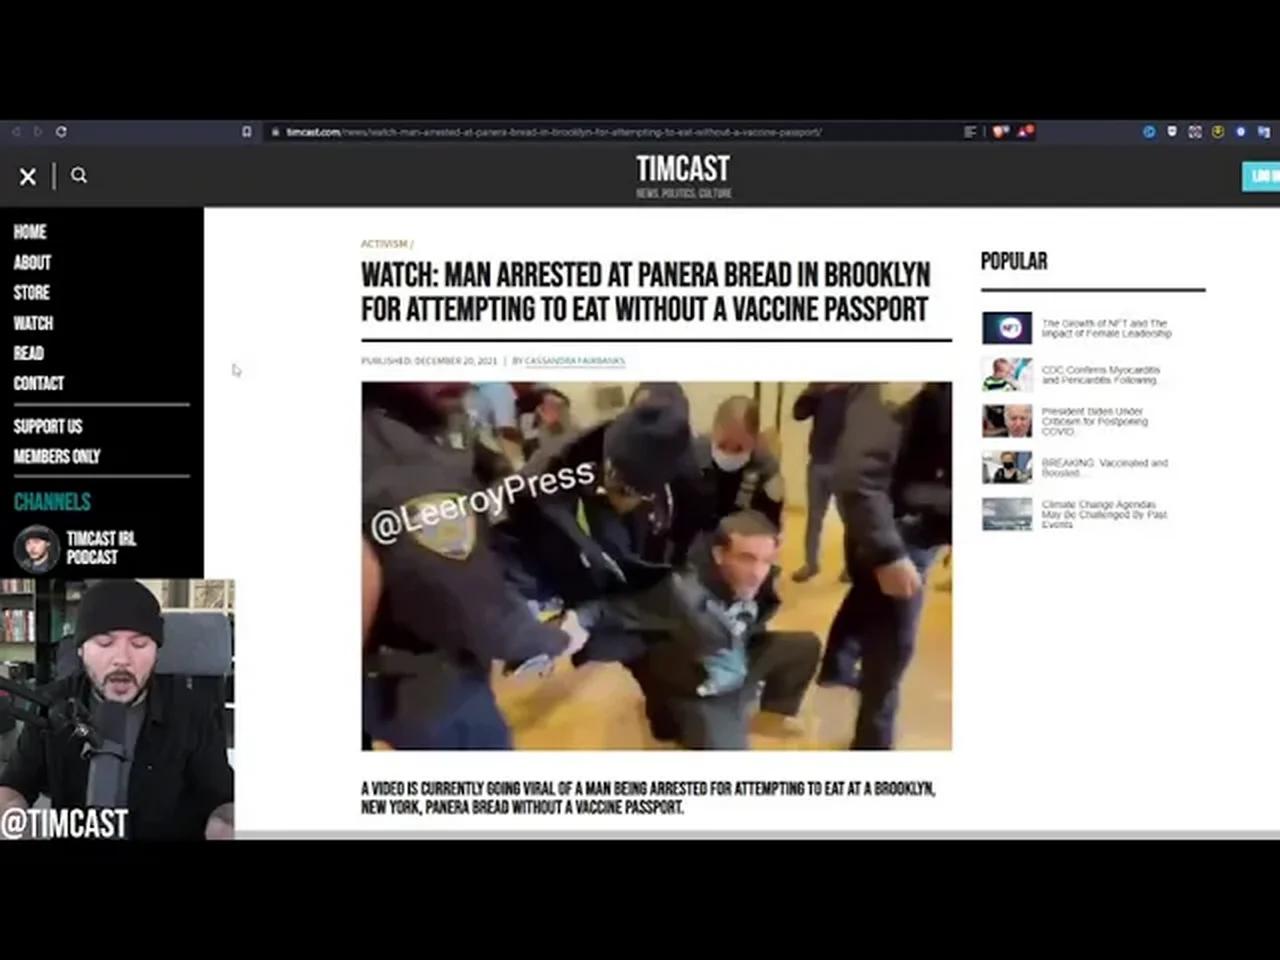 NYC Mayor Gloats Of Stripping Human Rights To Coerce Vaccinations Mandate Protesters ARRESTED Again